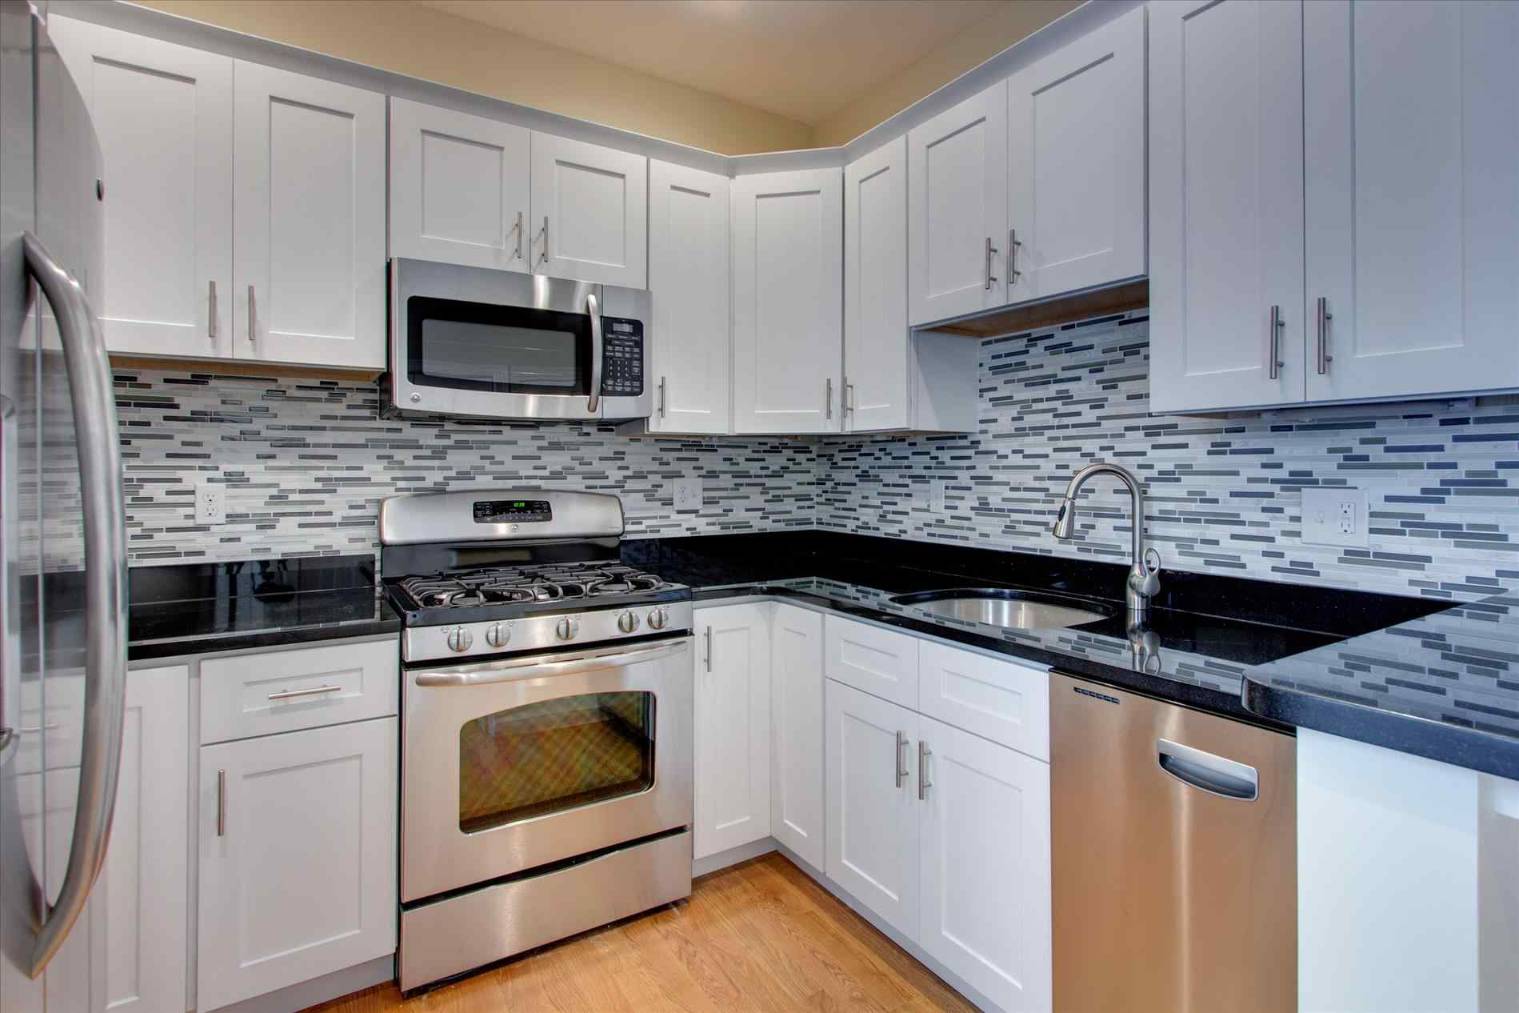 Backsplash ideas for white cabinets and black countertops